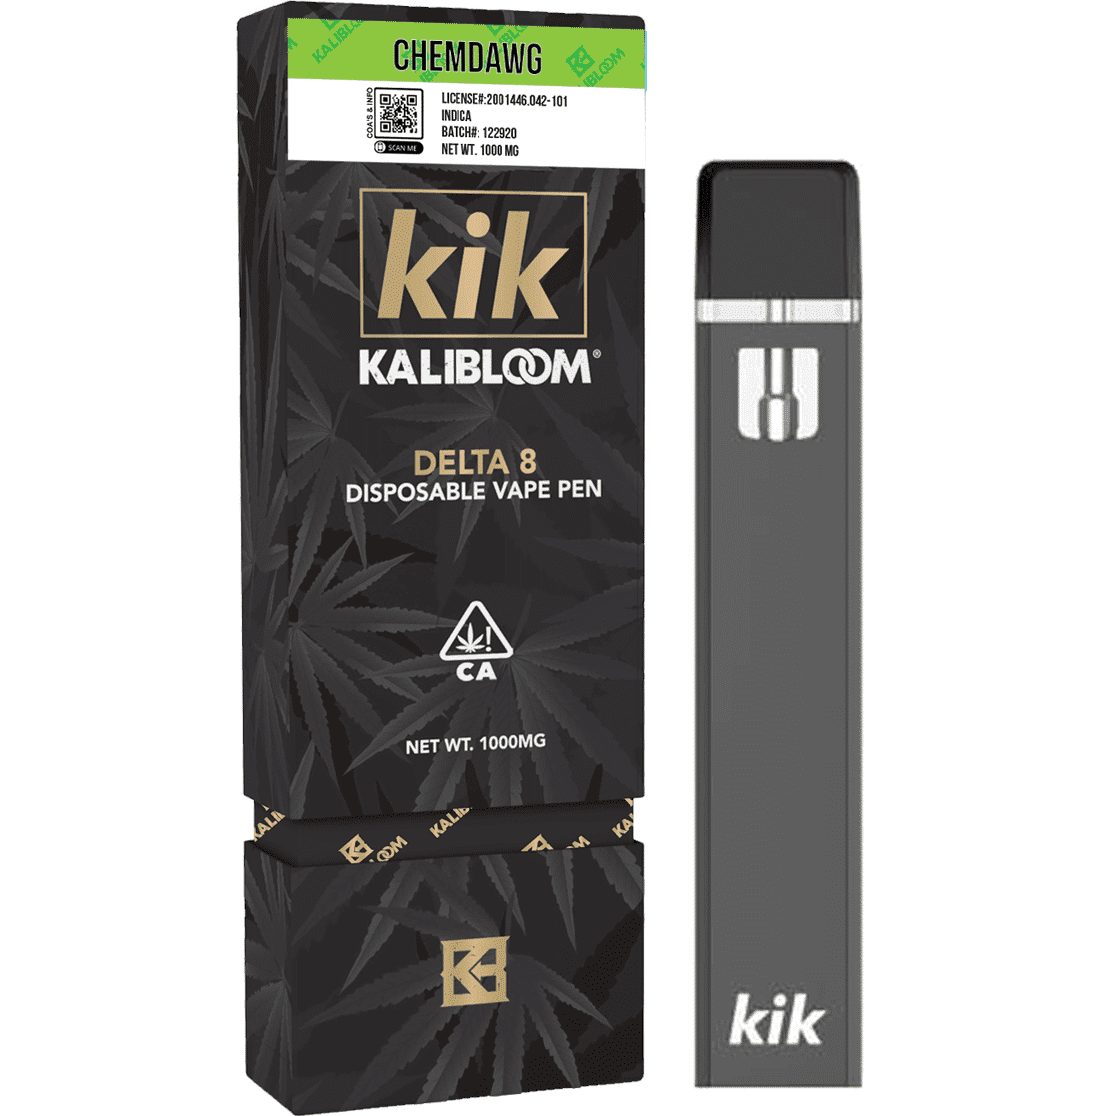 D8_Gas_Delta_8_Delta8_Disposable_Vape_Device_Kik_1g_Chemdawg.png